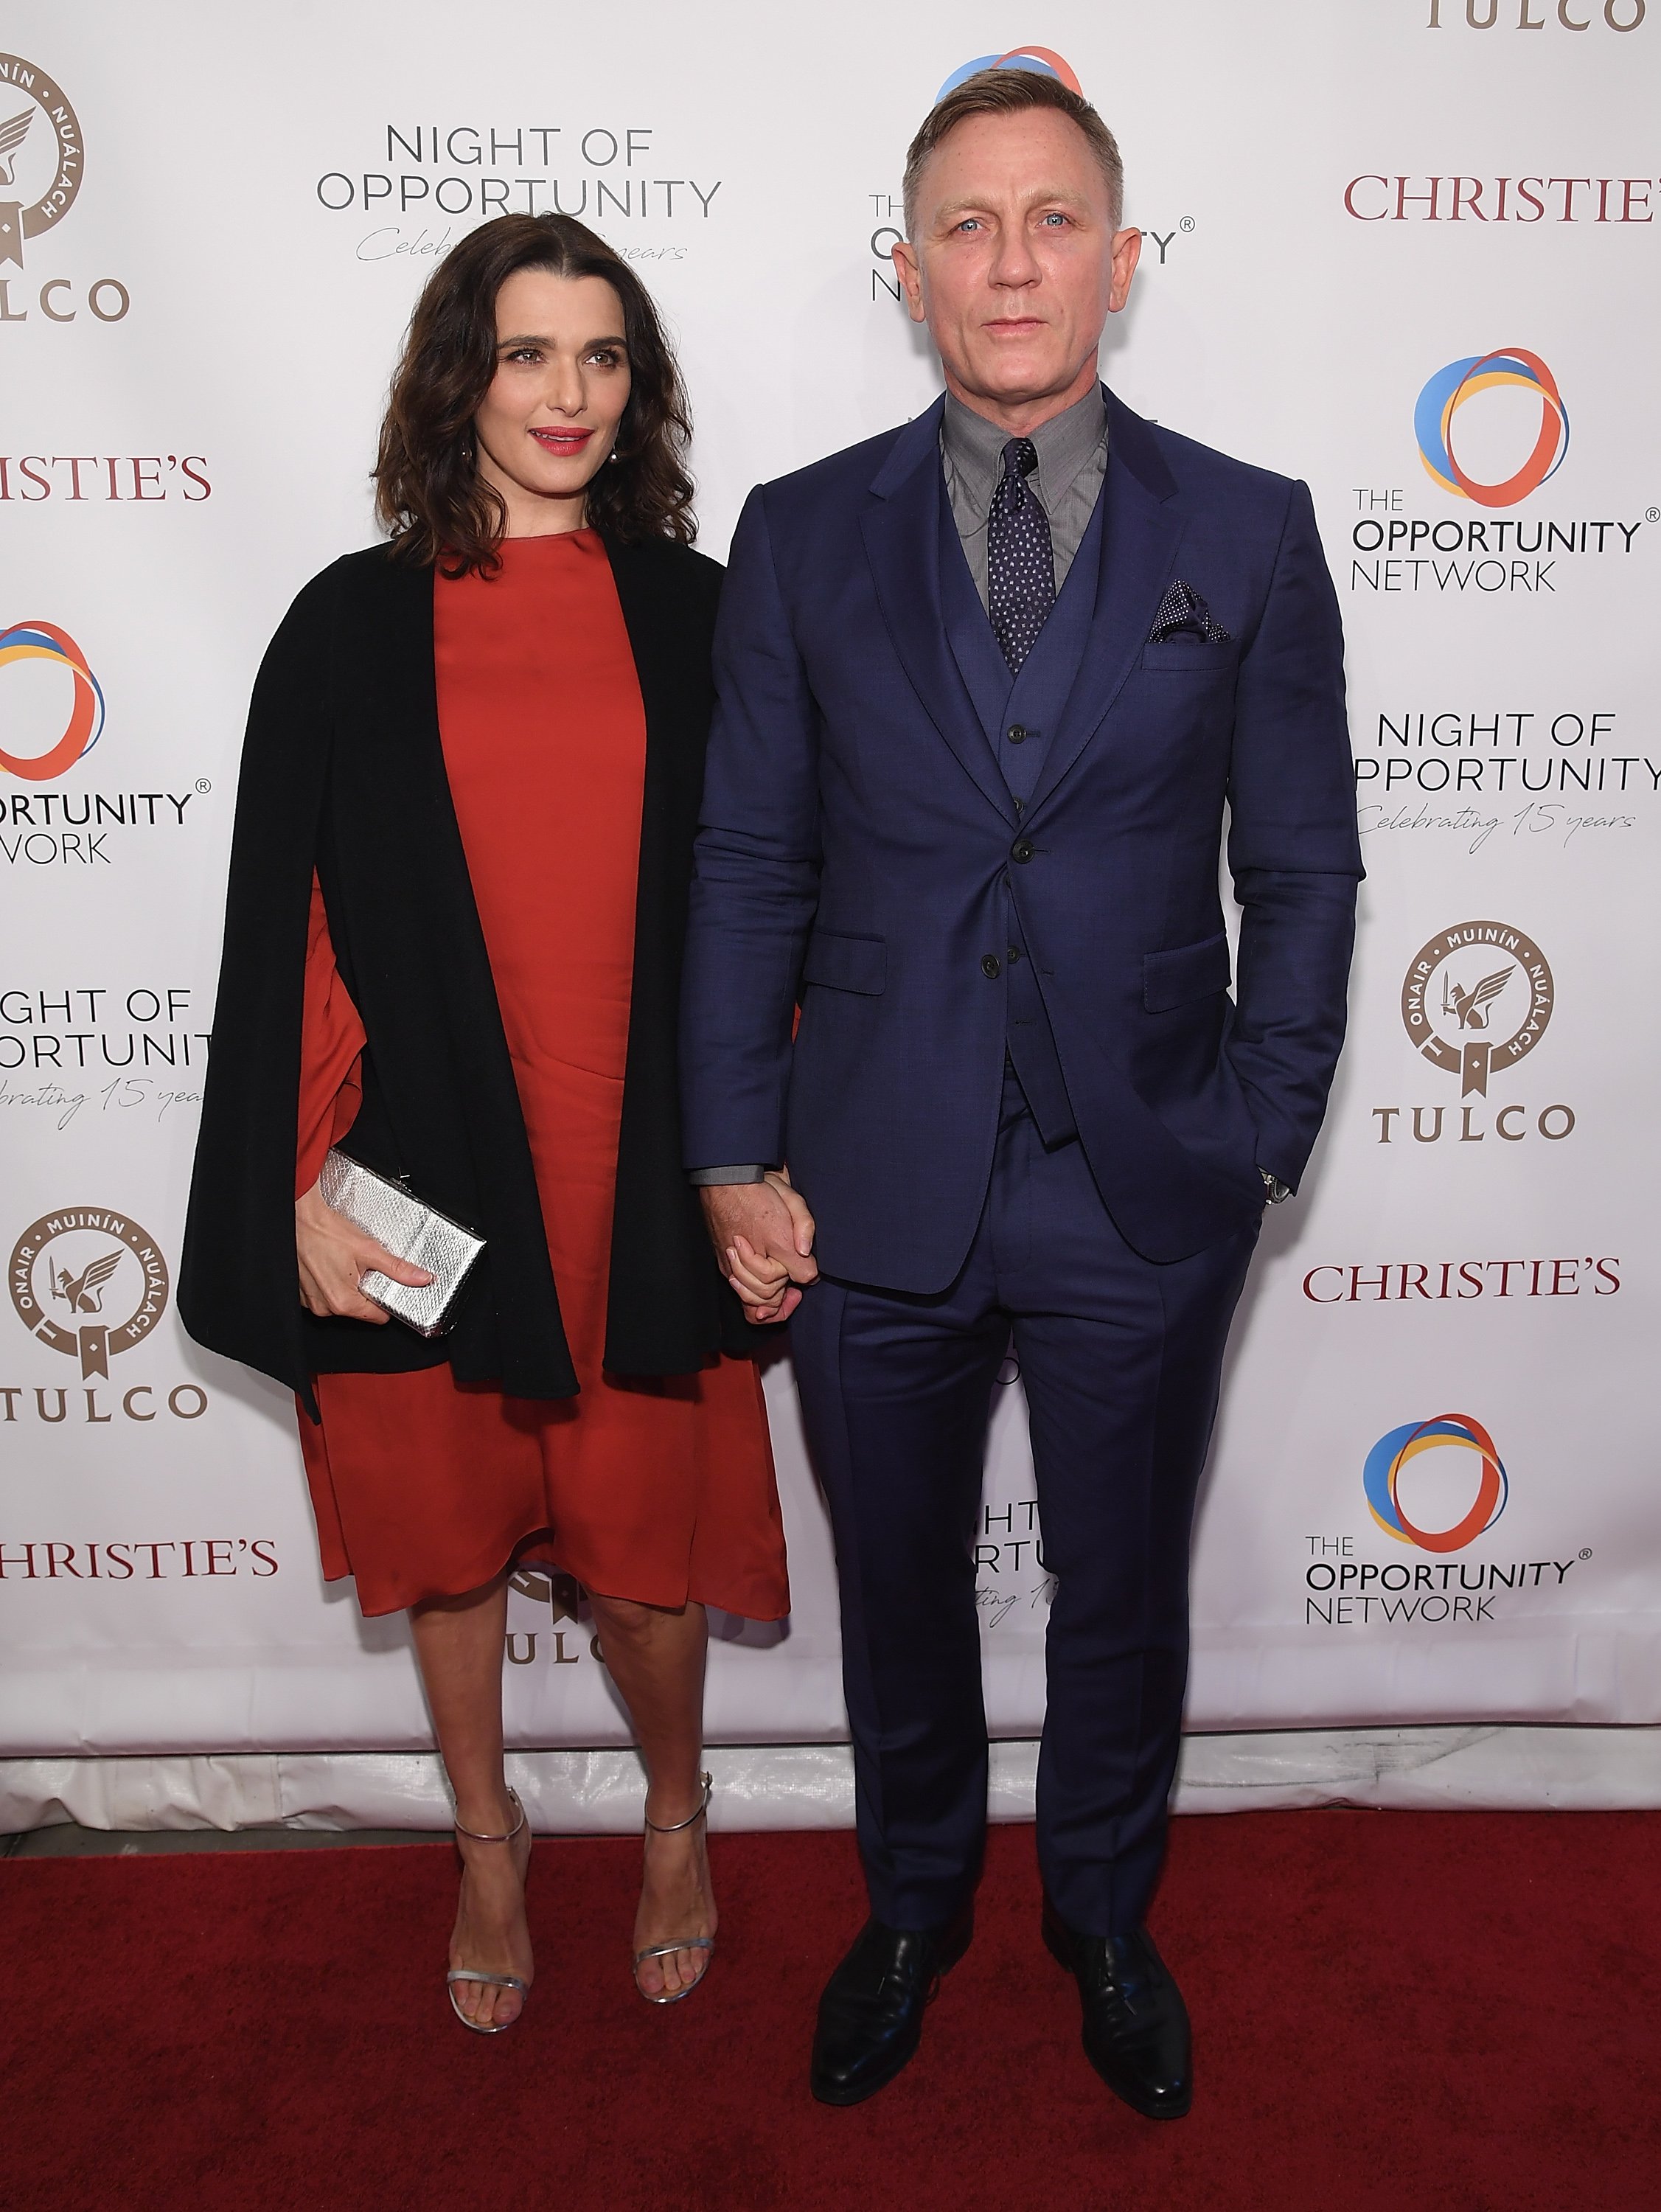 Rachel Weisz and Daniel Craig at The Opportunity Network's 11th Annual Night of Opportunity on April 9, 2018, in New York City. | Source: Getty Images